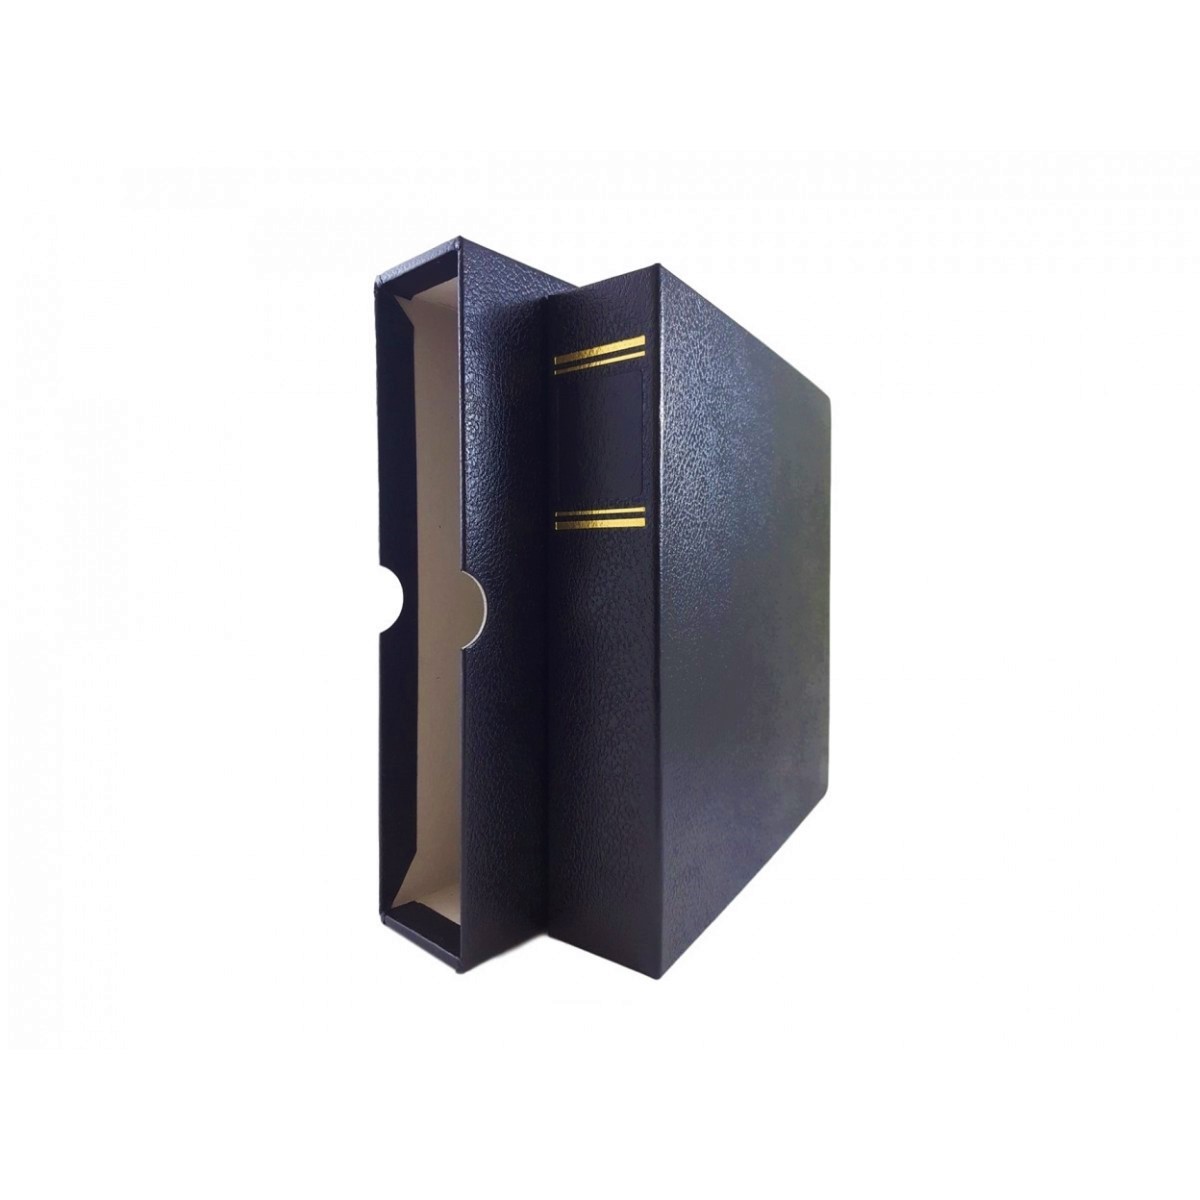 Binders with slipcover, Blue, Empty